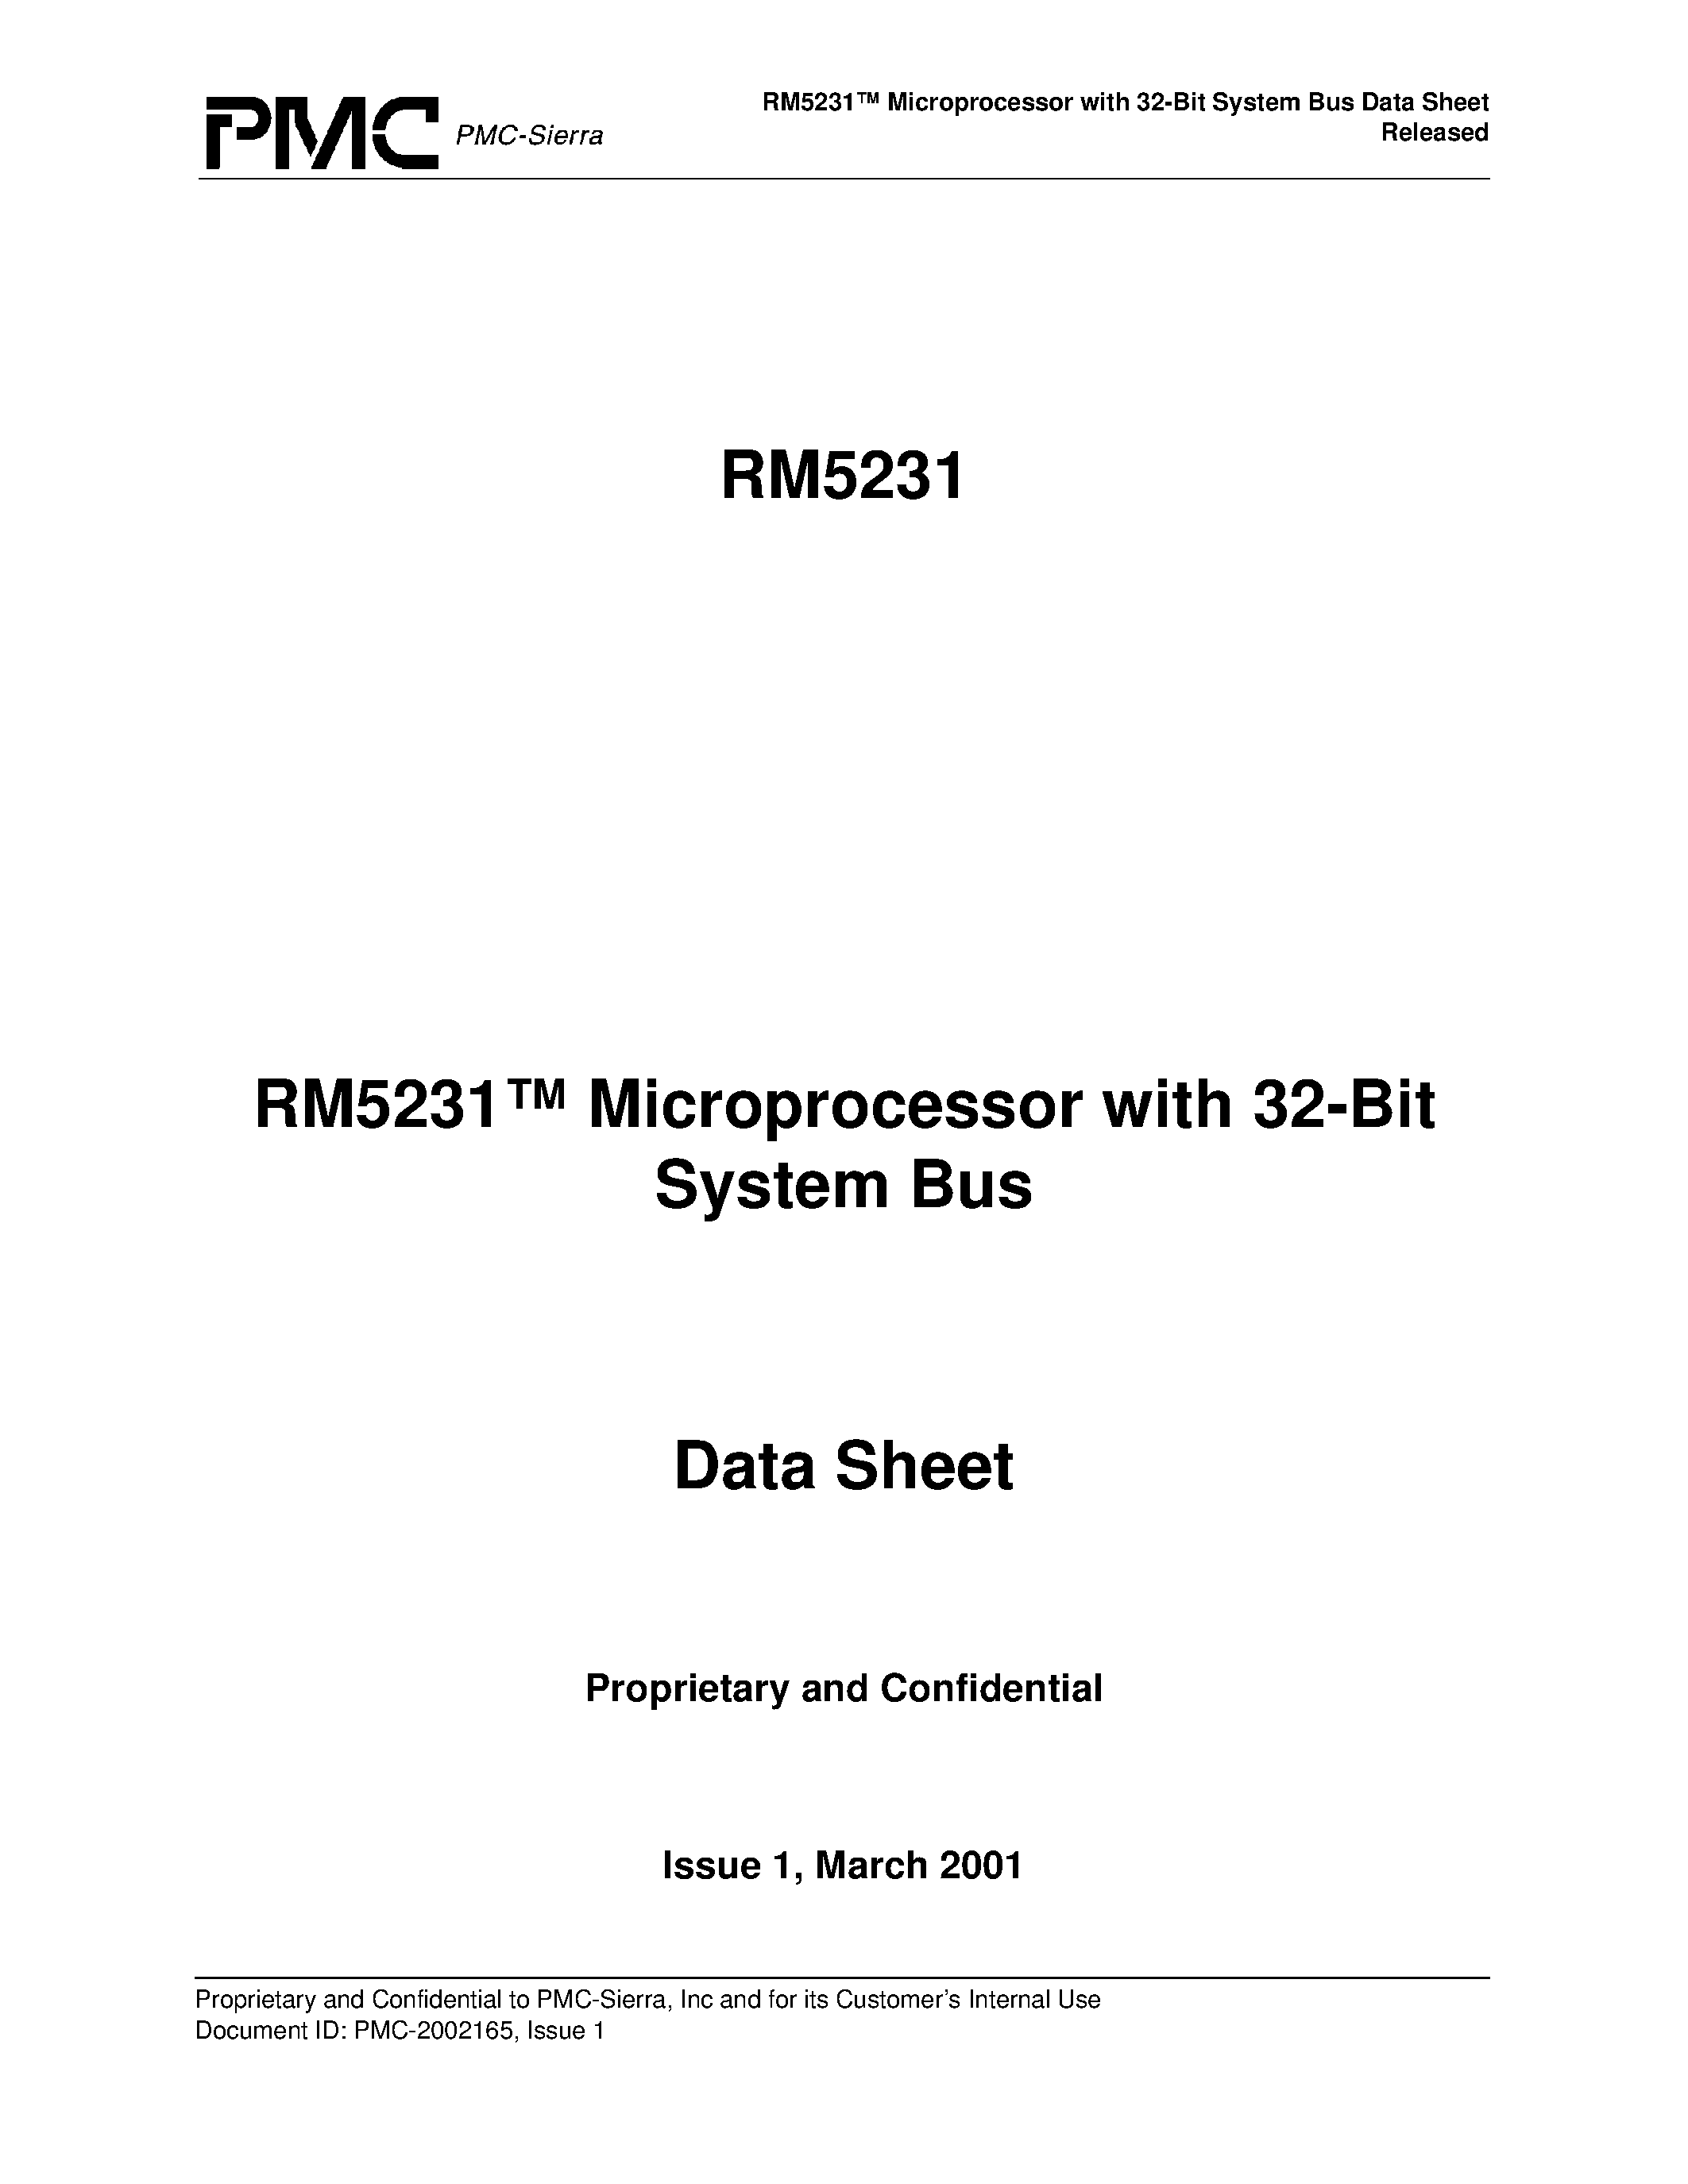 Даташит RM5231-200-Q - RM5231 Microprocessor with 32-Bit System Bus Data Sheet Released страница 1